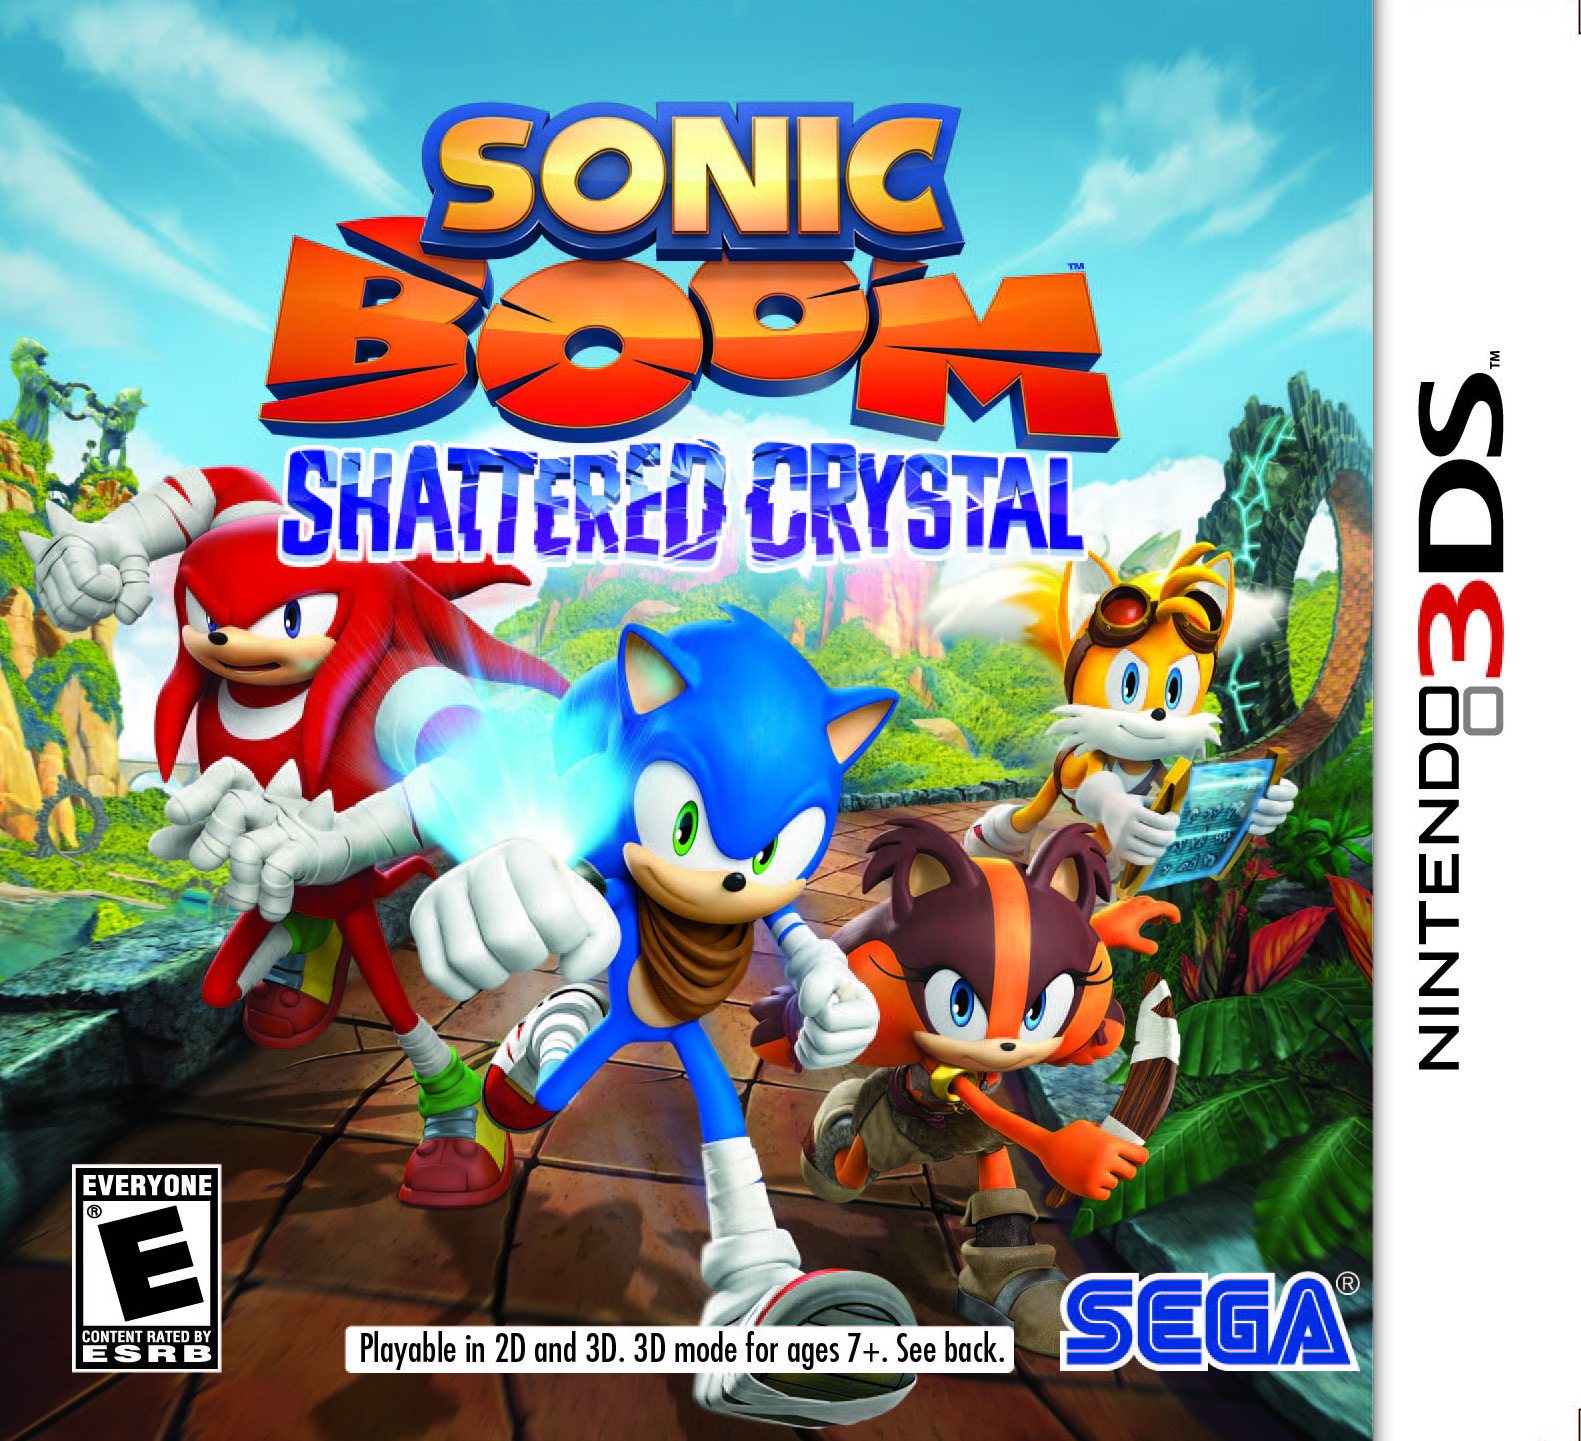 http://images.nintendolife.com/news/2014/07/sonic_boom_release_dates_are_confirmed_for_wii_u_and_3ds/attachment/1/original.jpg